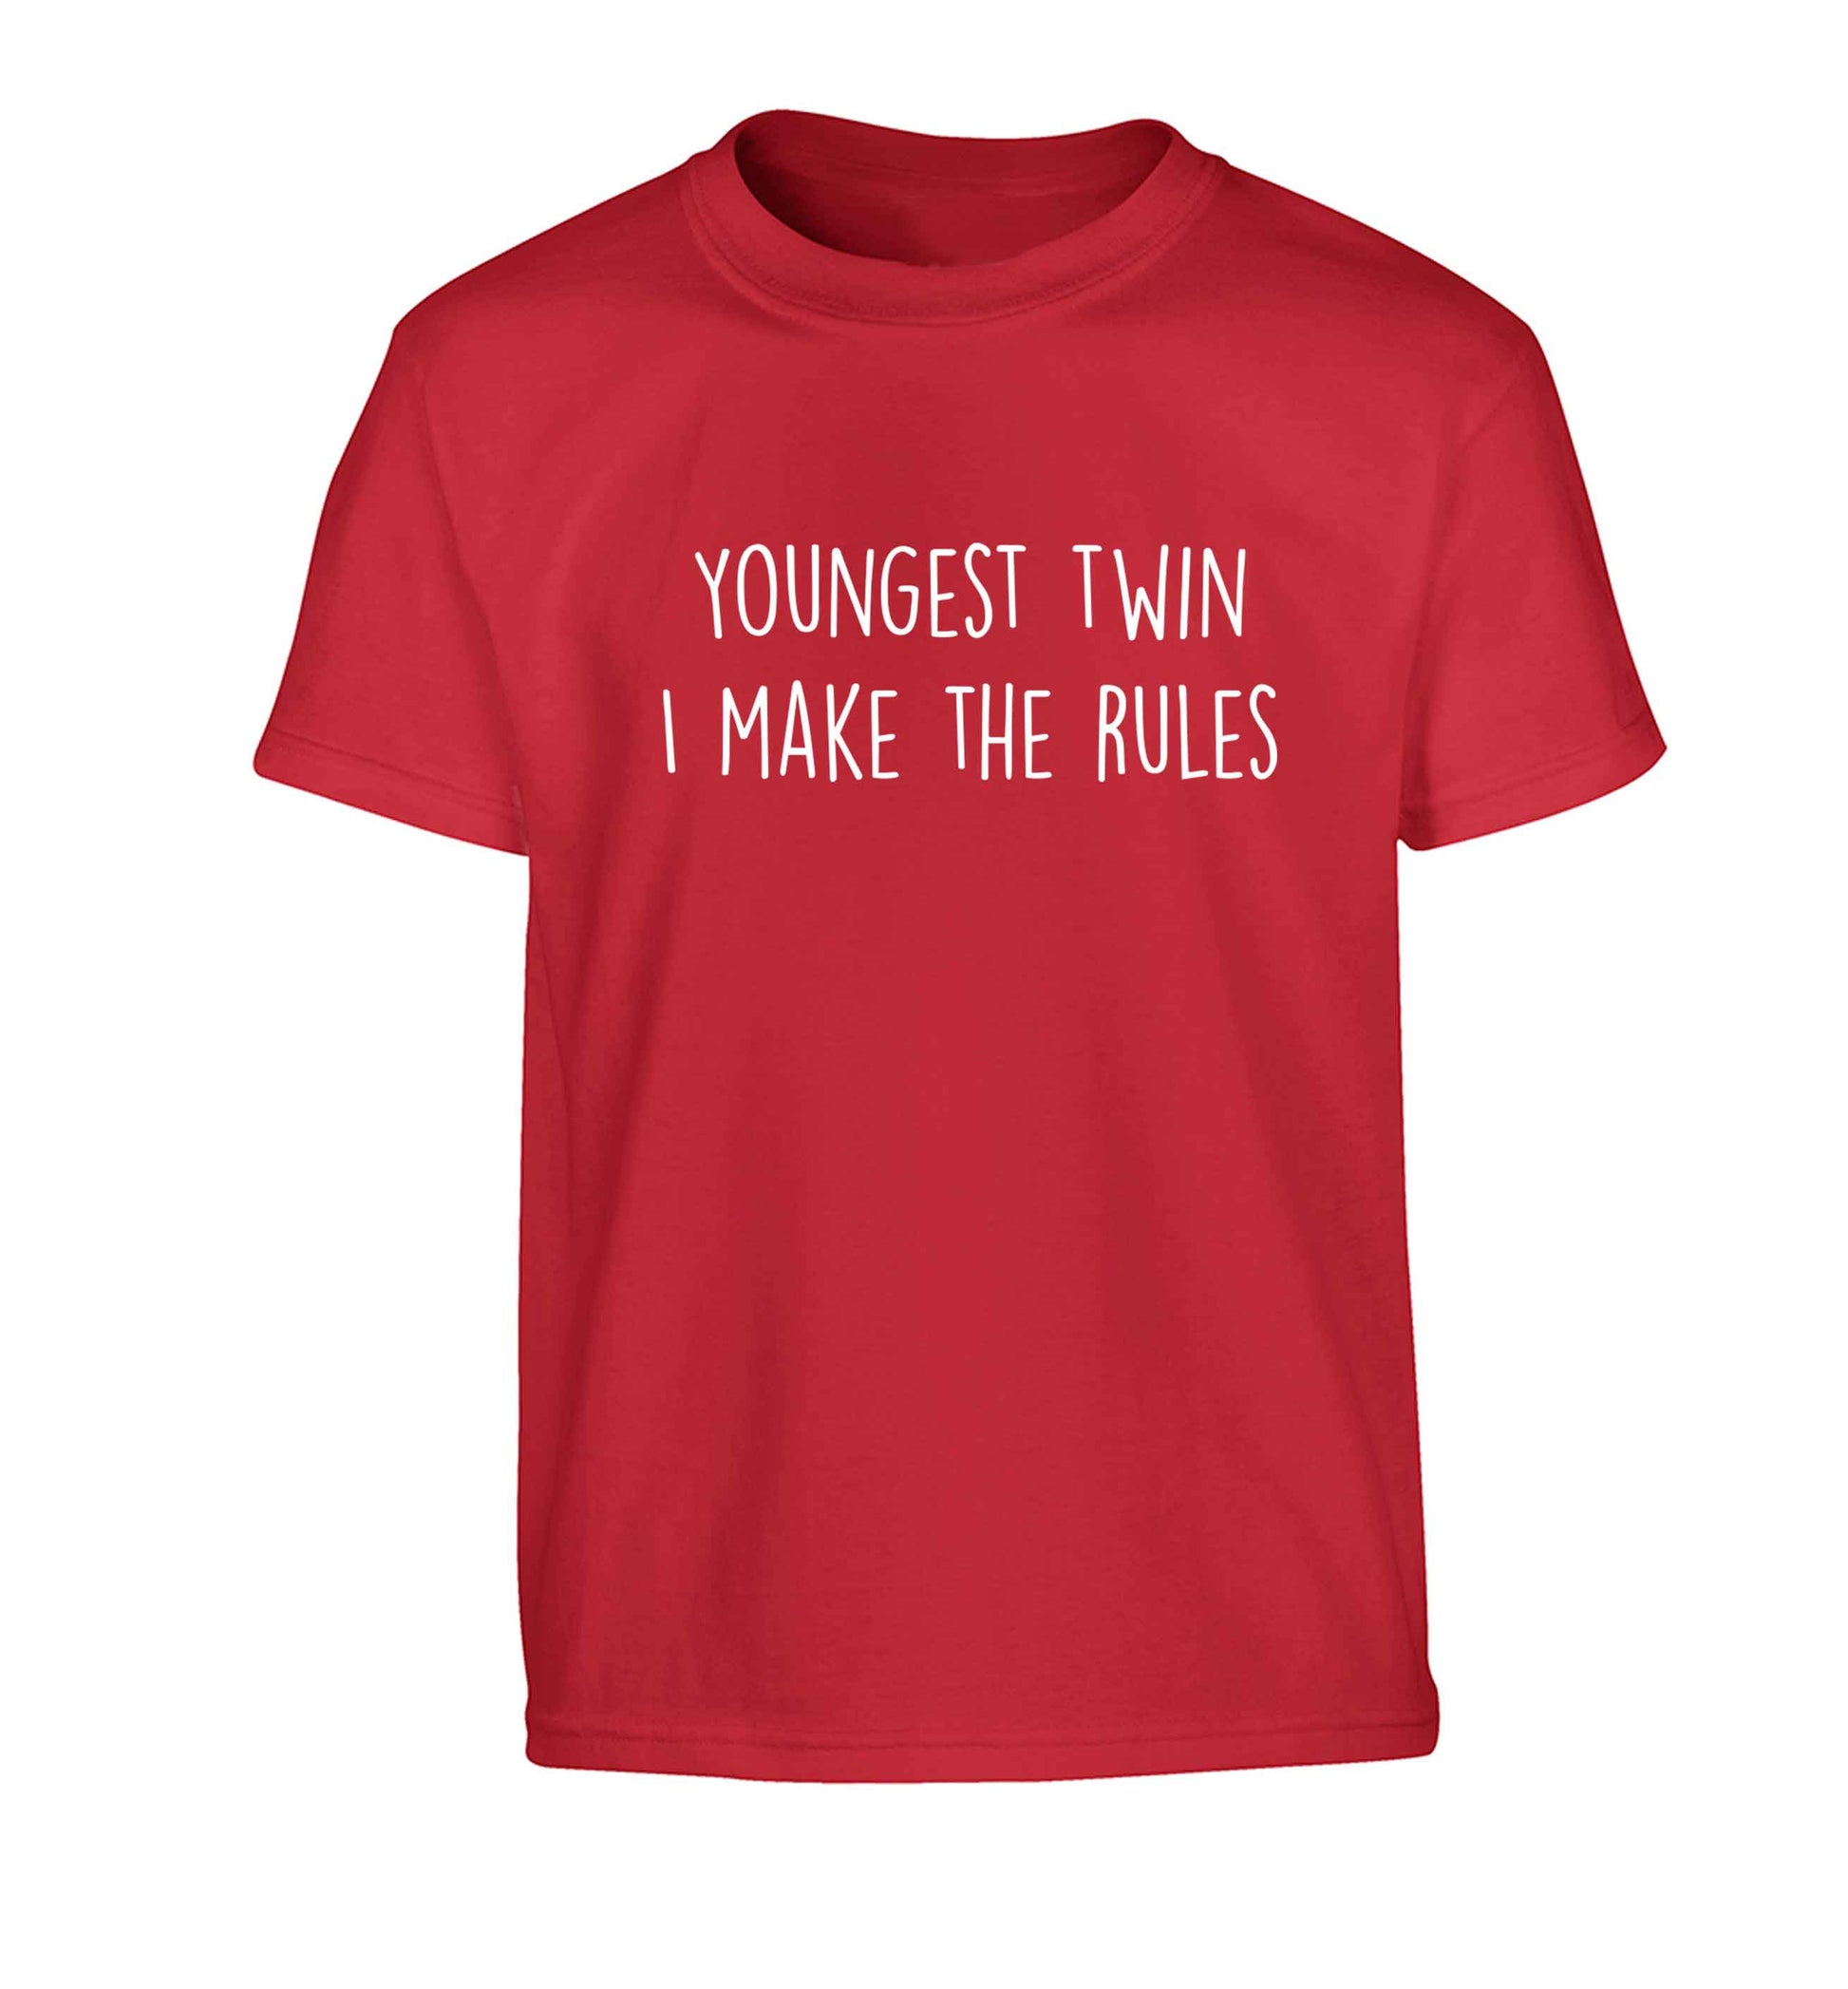 Youngest twin I make the rules Children's red Tshirt 12-13 Years